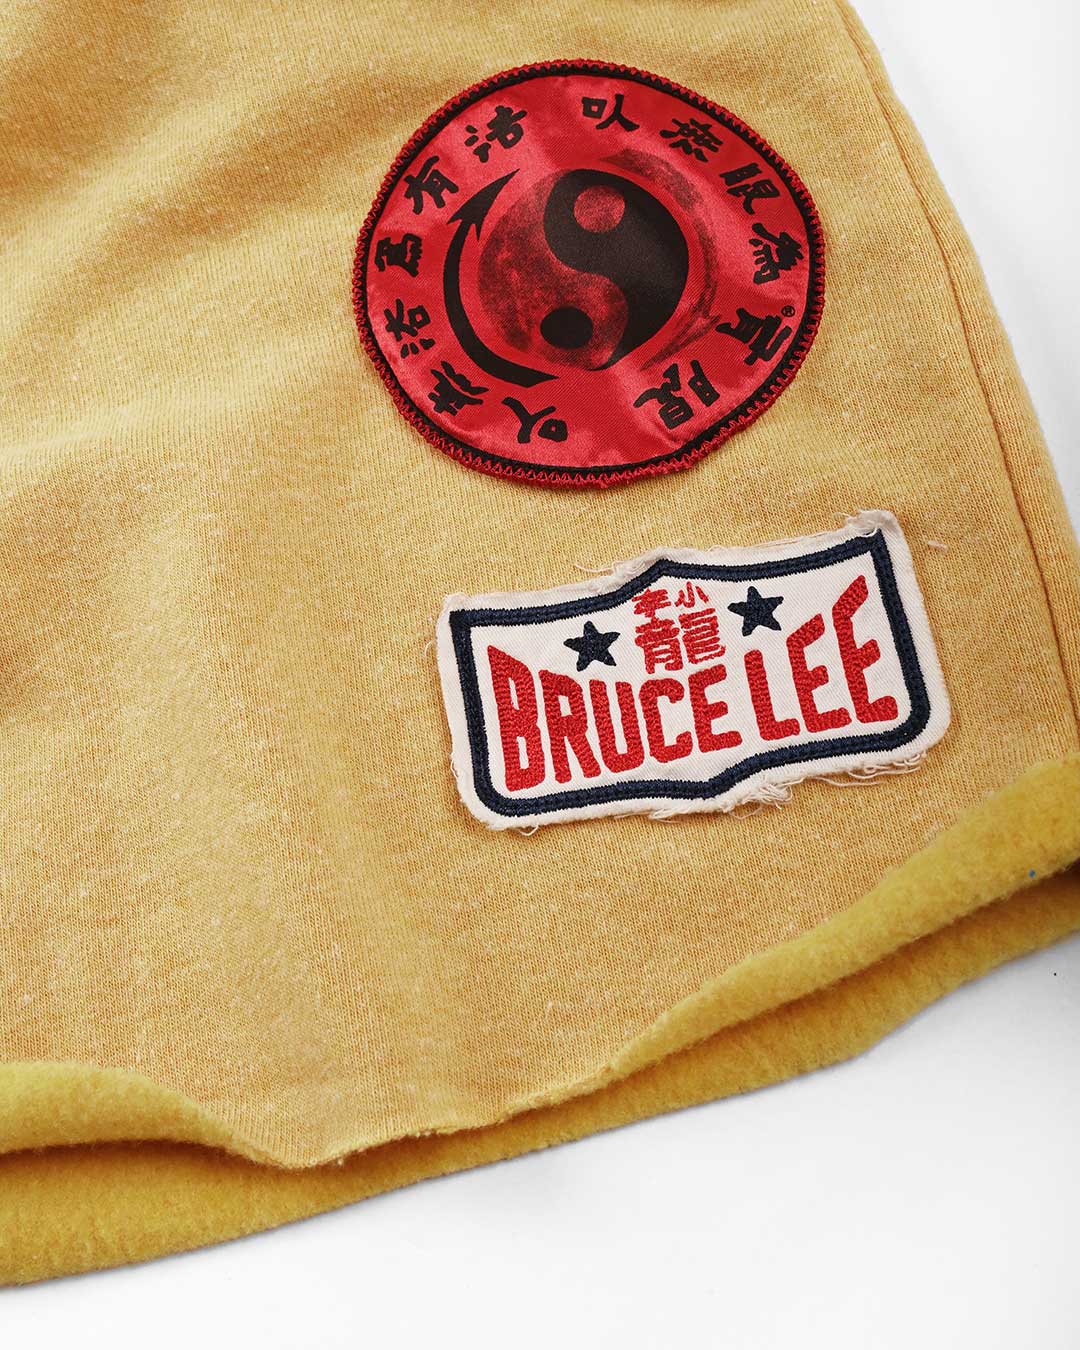 Bruce Lee JKD Gold Shorts - Roots of Fight Canada